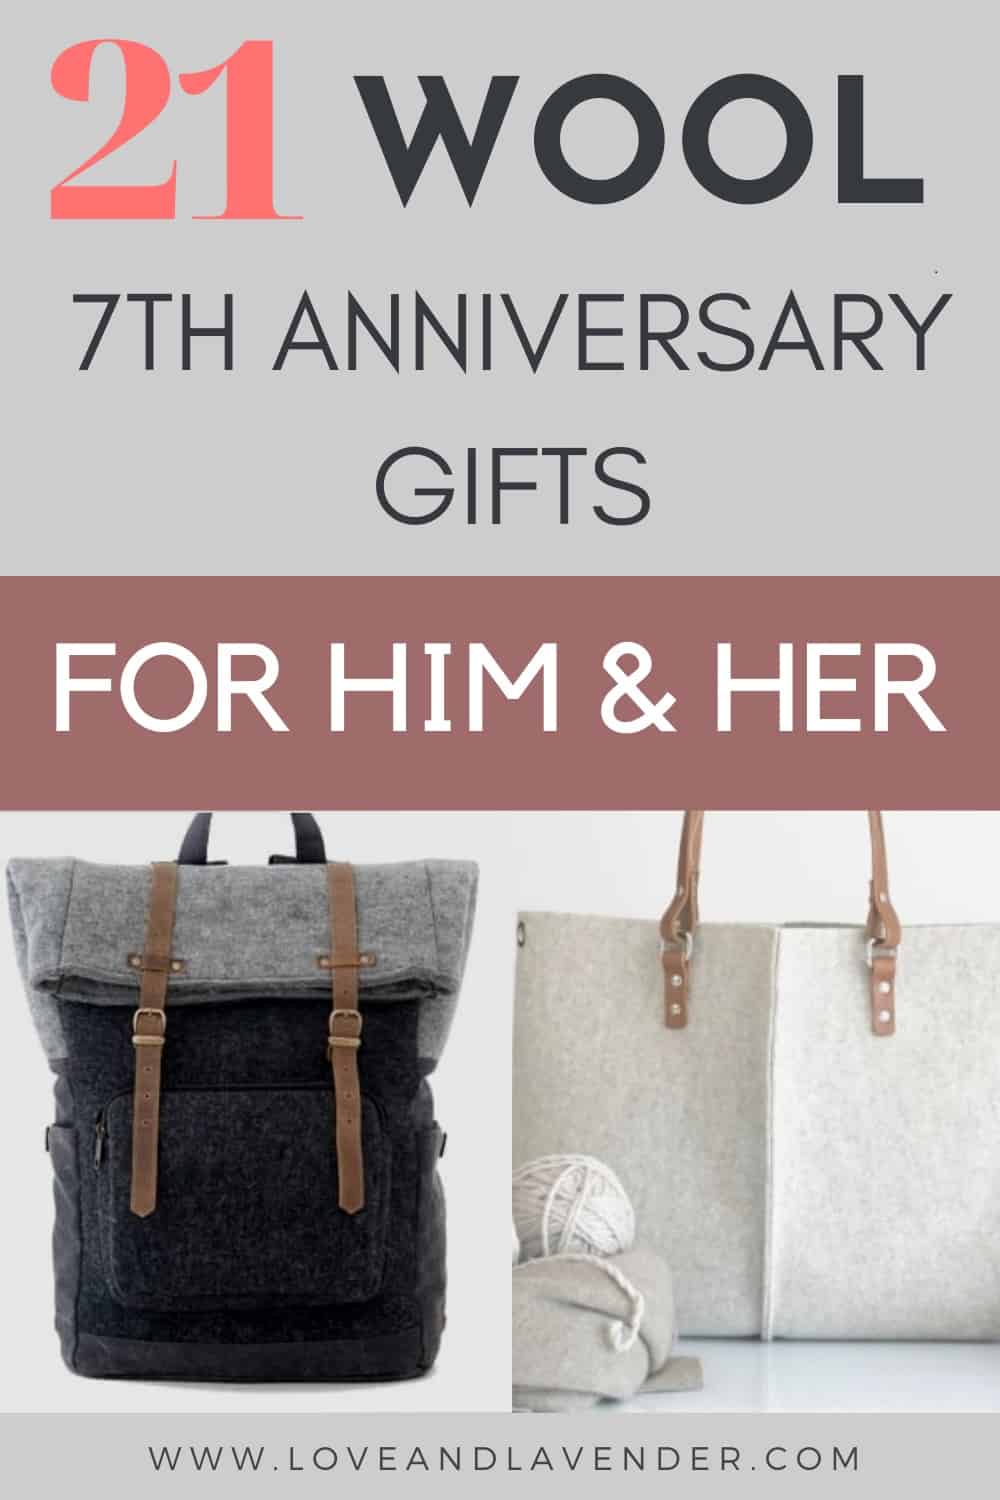 21 Wool Gifts to Warm Your 7th Anniversary